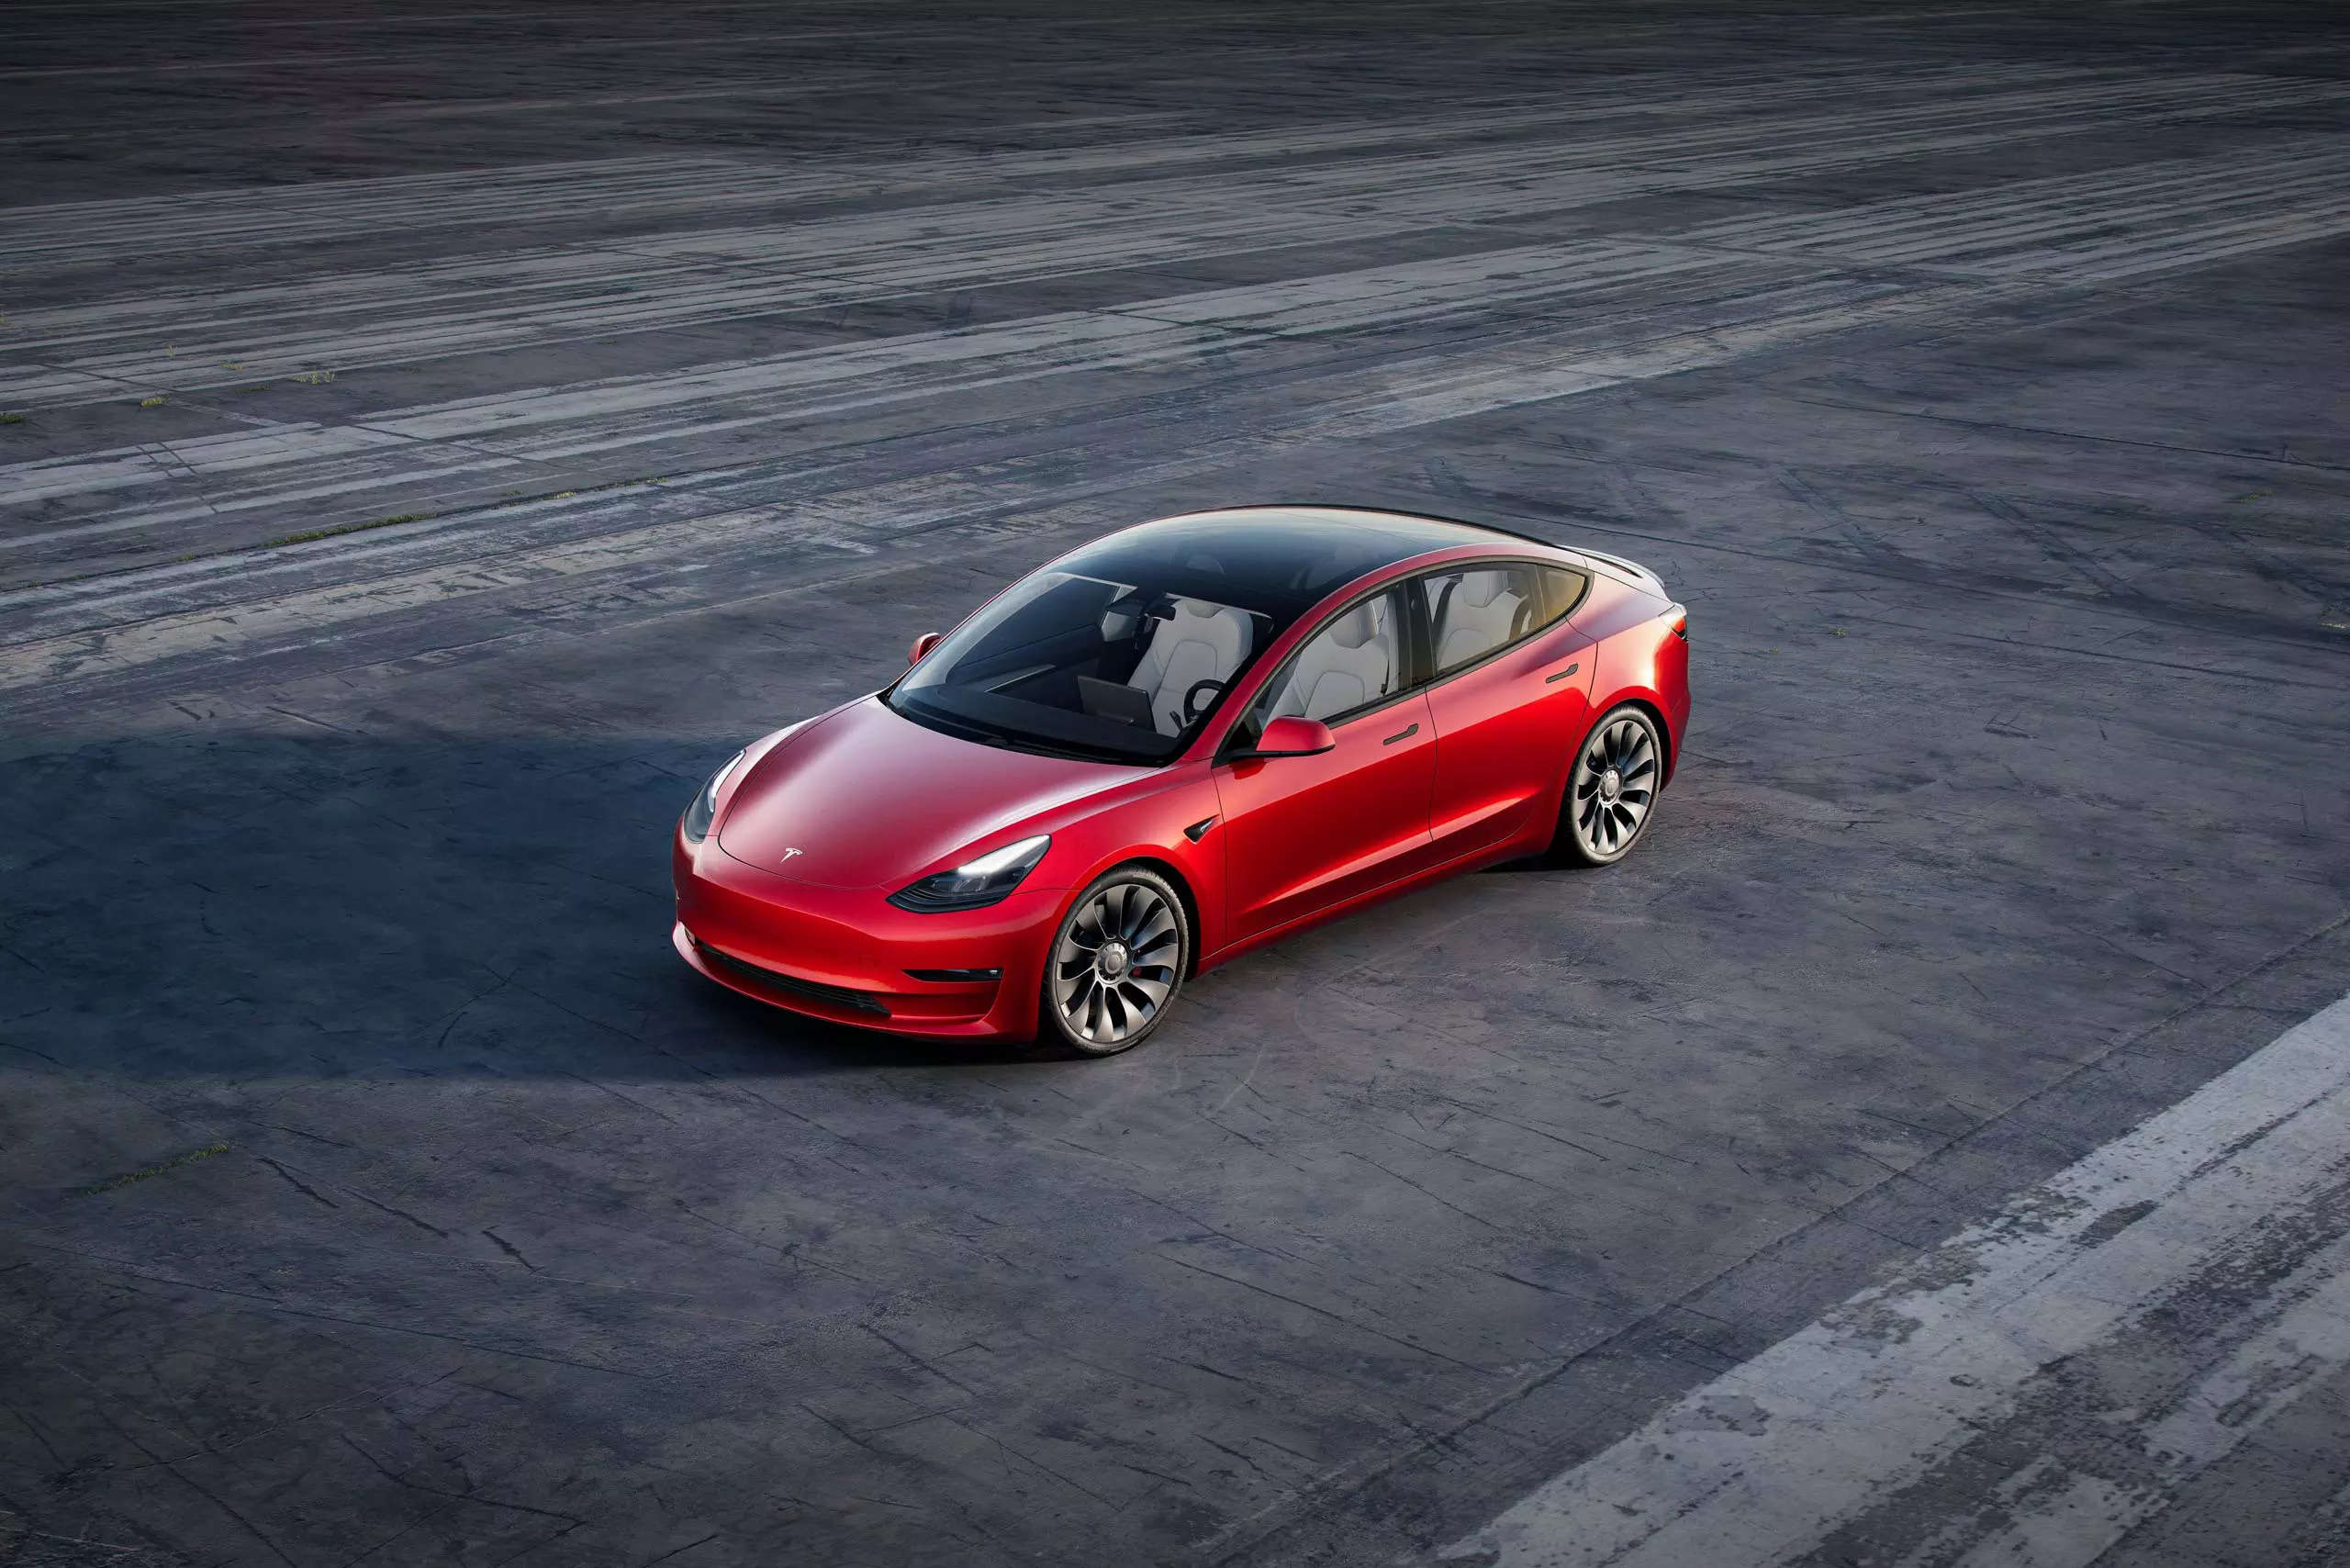 Tesla Model 3 Highland vs. Rivals: Which Is The Best…